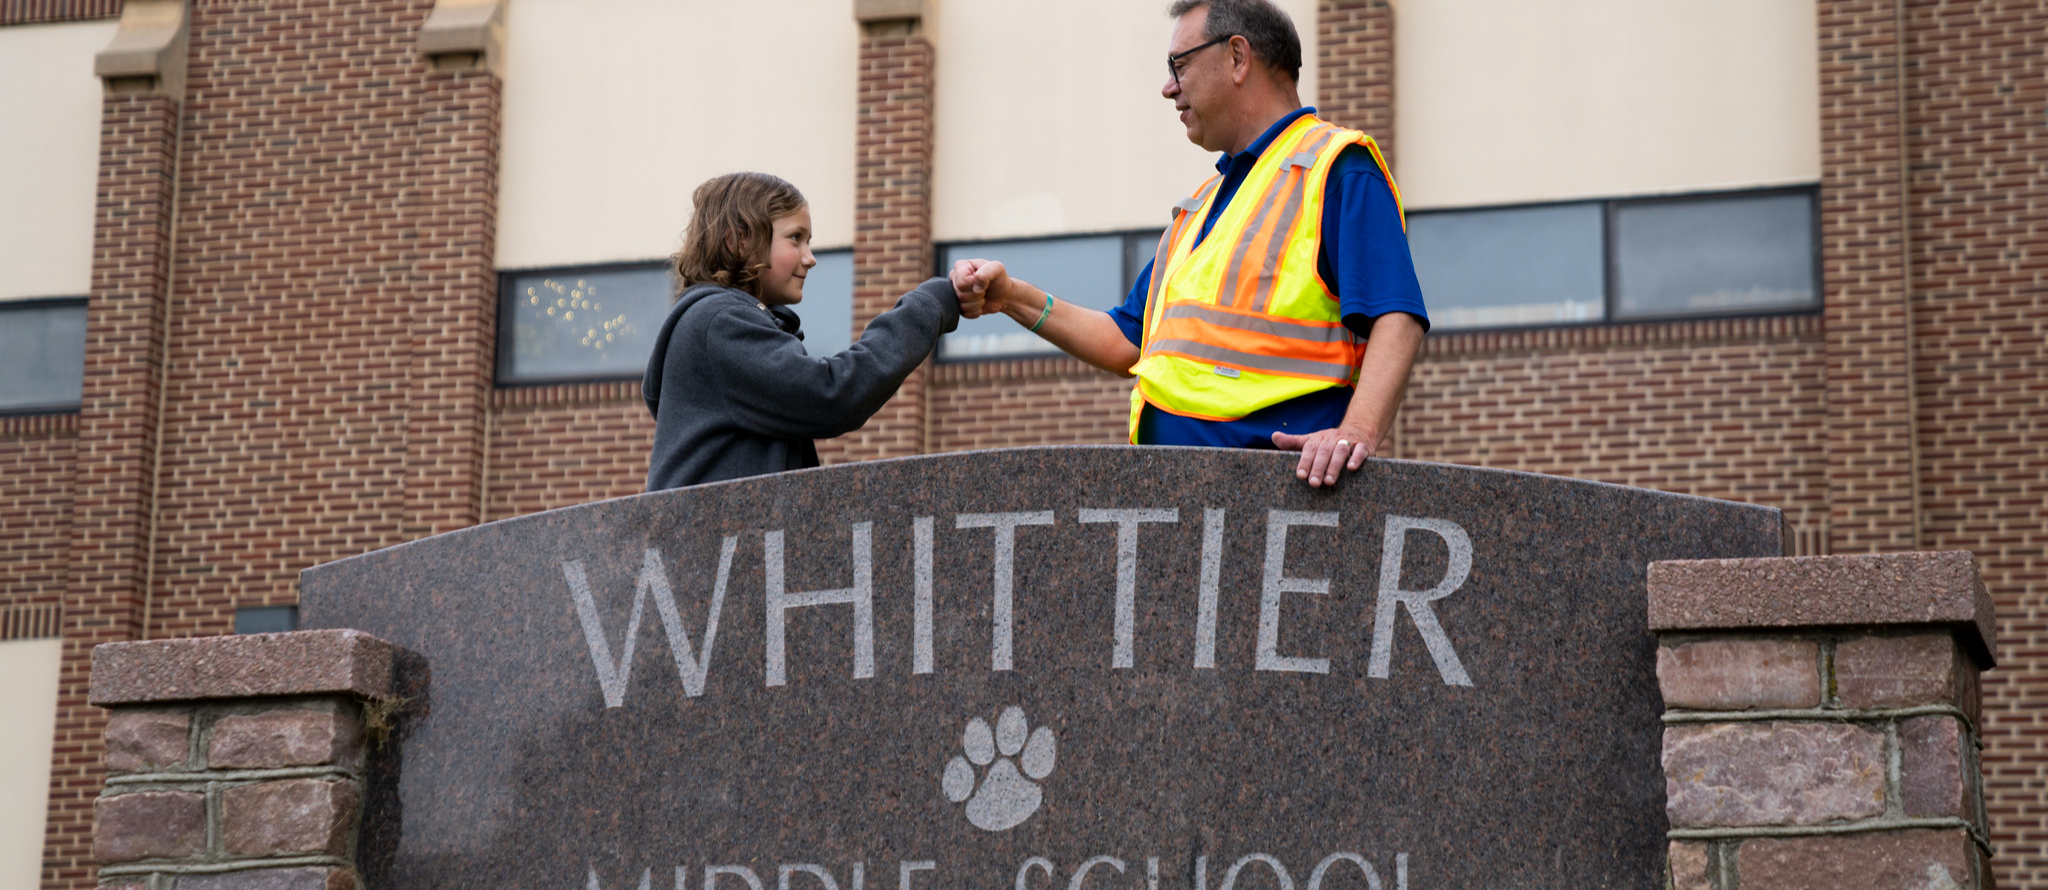 Principal's Weekly Update (11/2-11/6) - Whittier Middle School